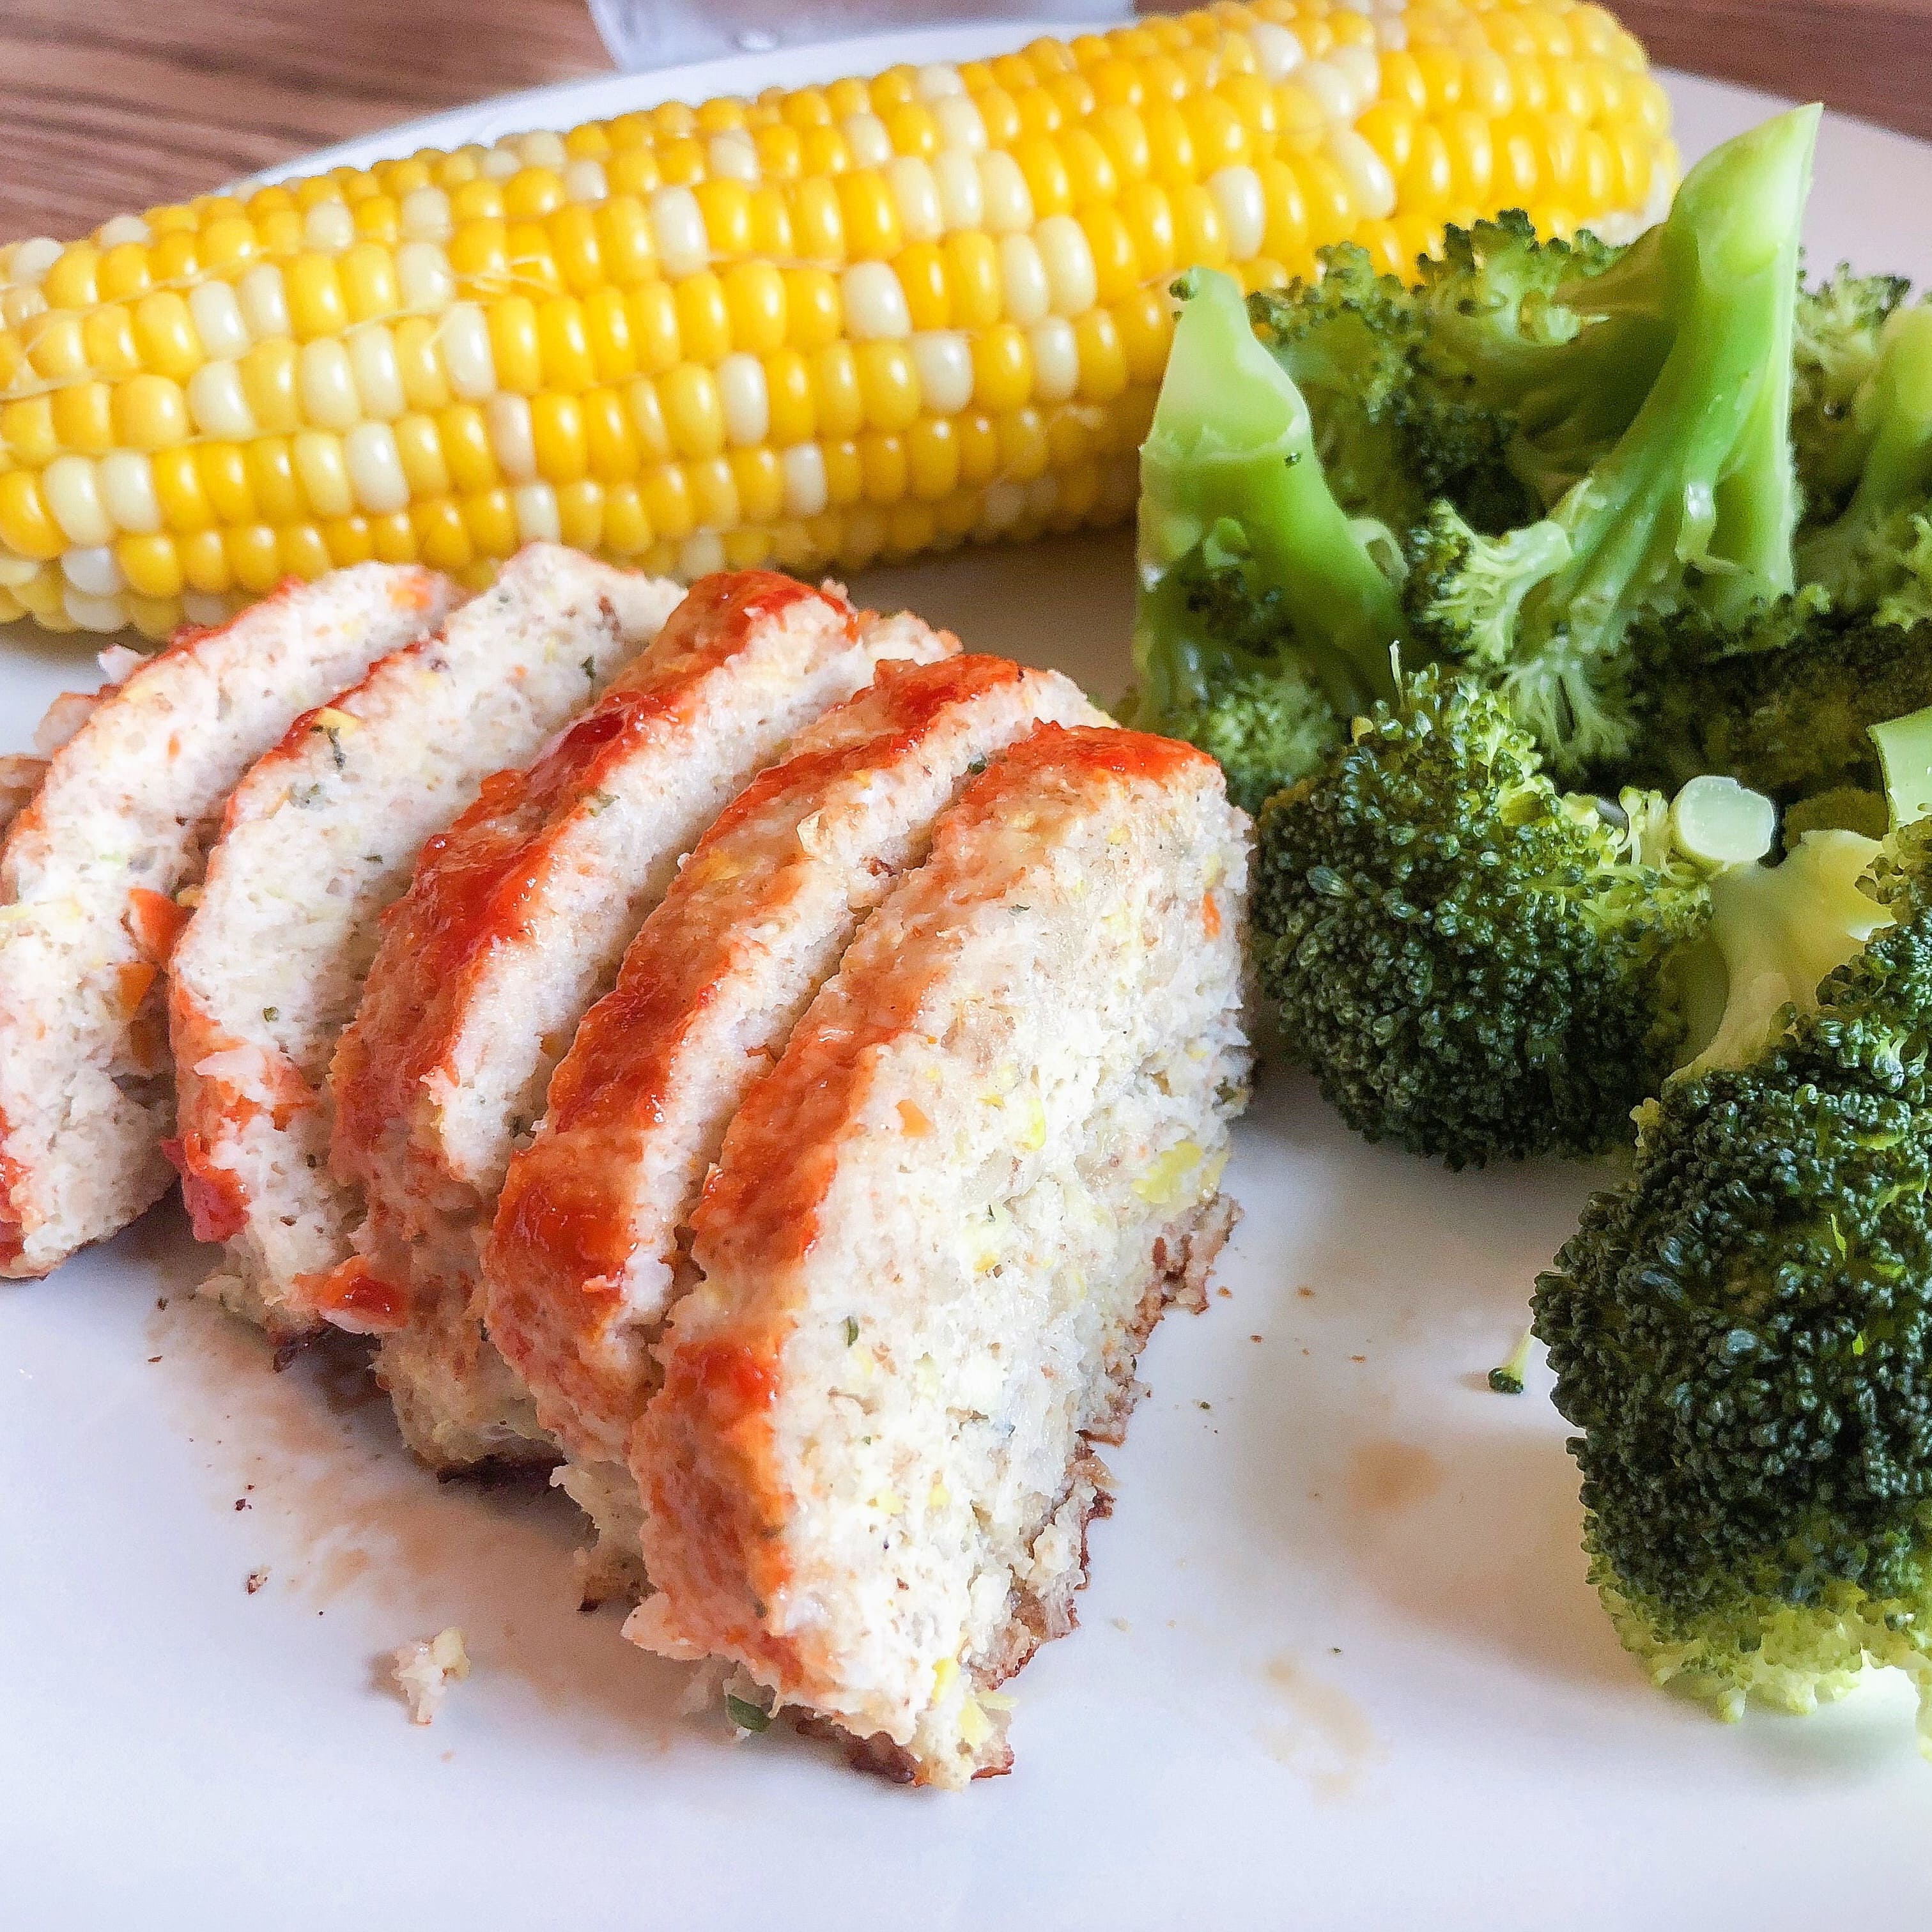 Plated Chicken Meatloaf Recipe Loaded With Veggies